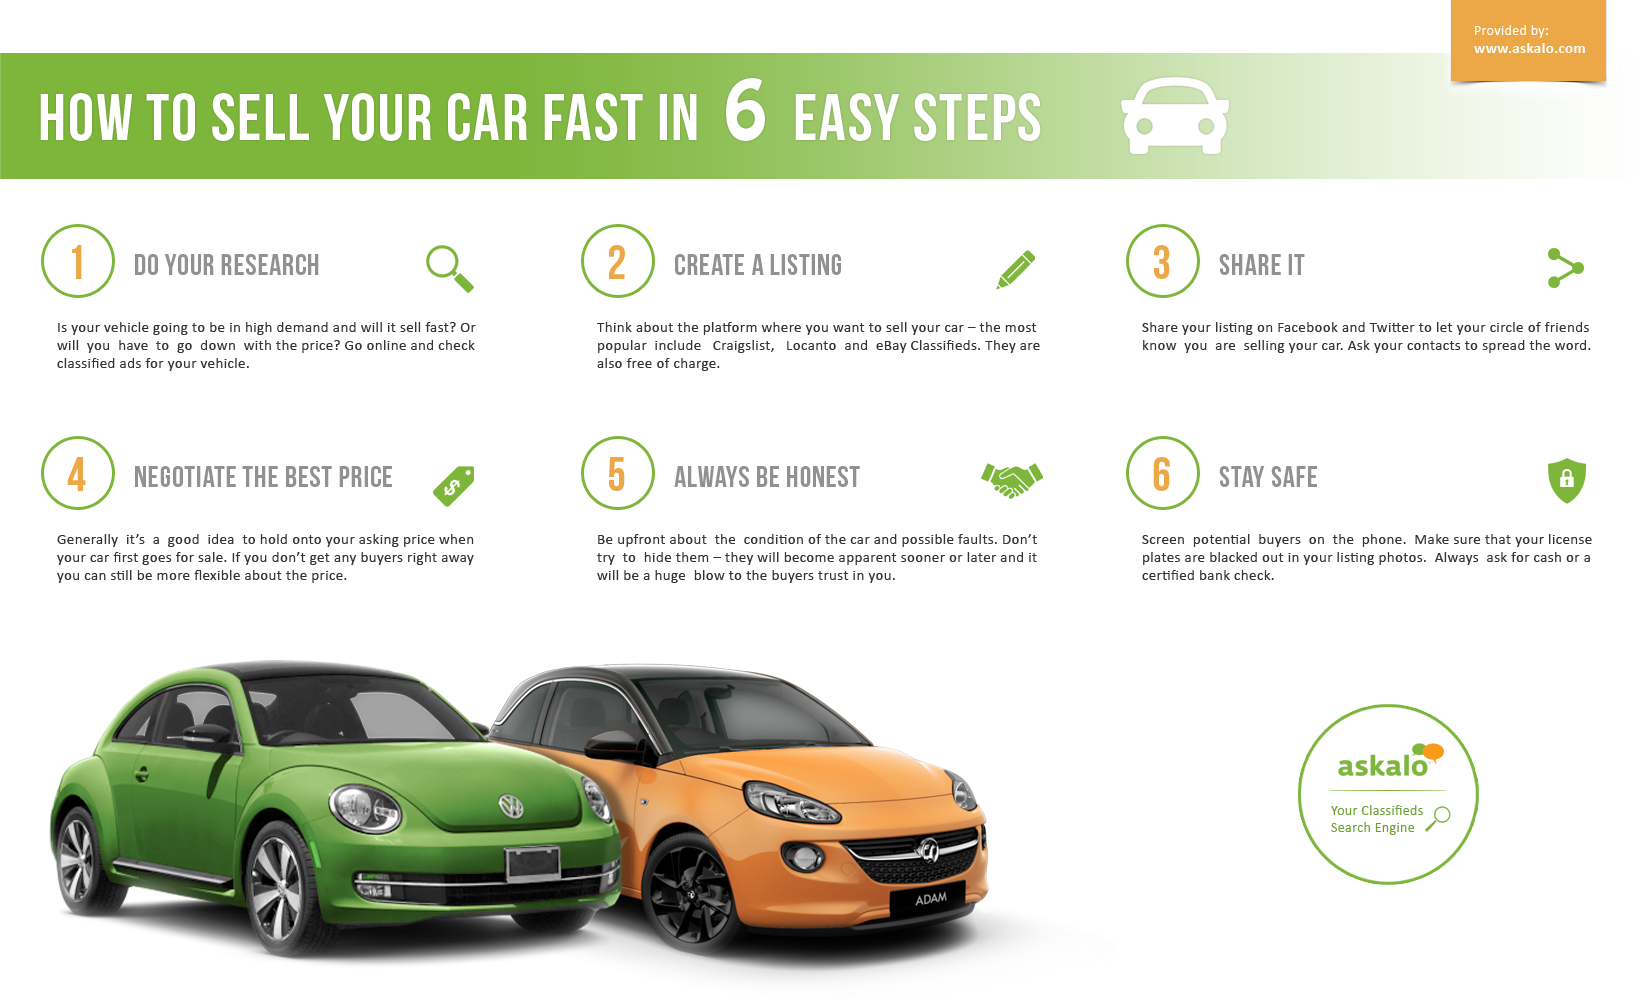 How to Sell your Car Fast: 6 Easy Steps - beQbe